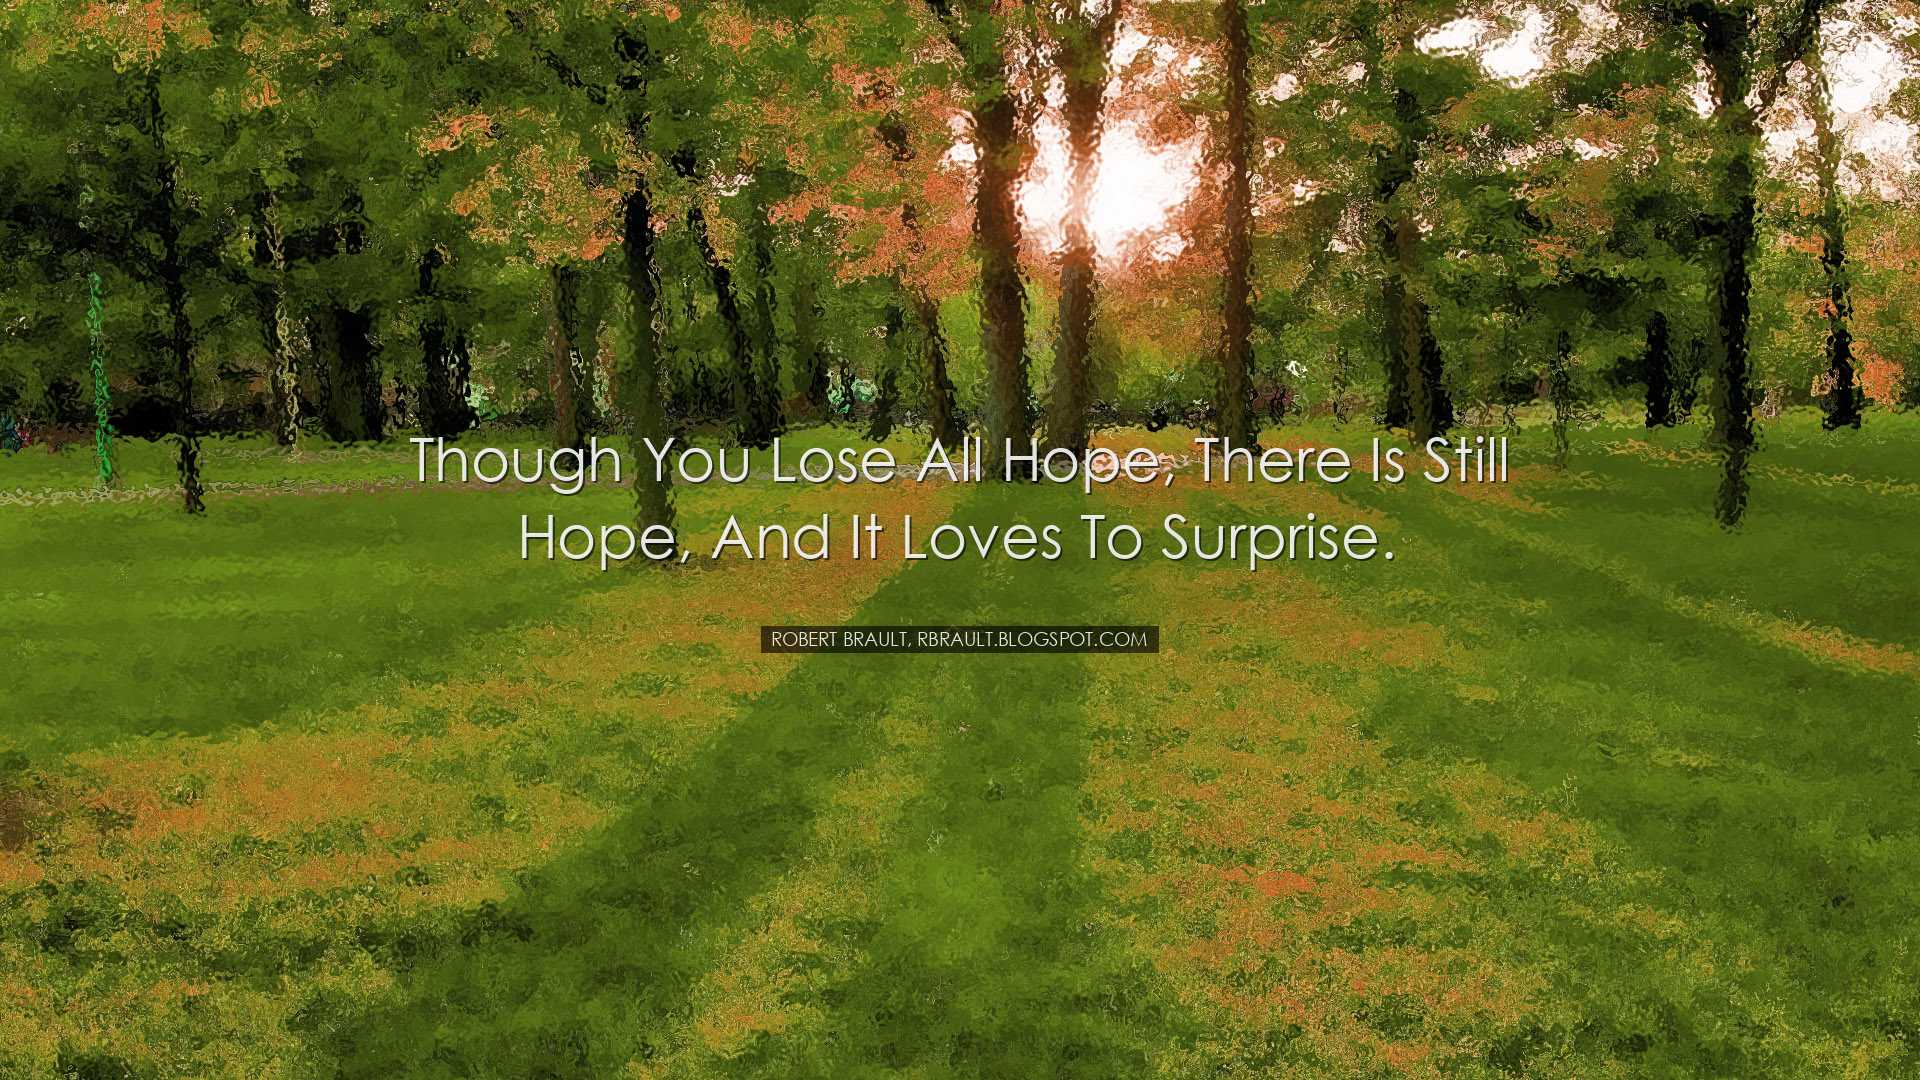 Though you lose all hope, there is still hope, and it loves to sur